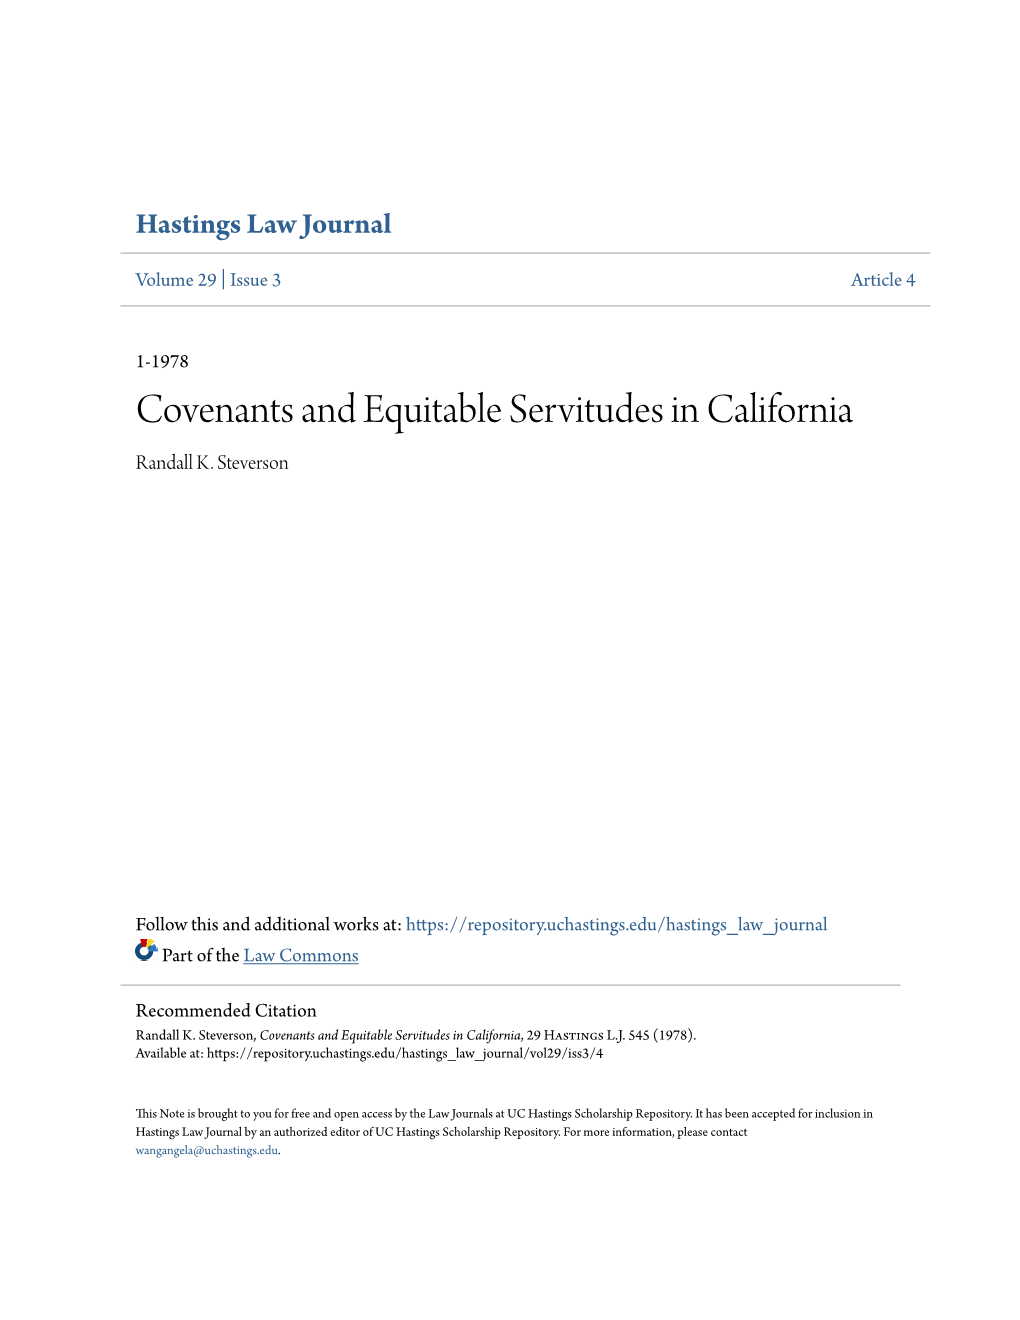 Covenants and Equitable Servitudes in California Randall K